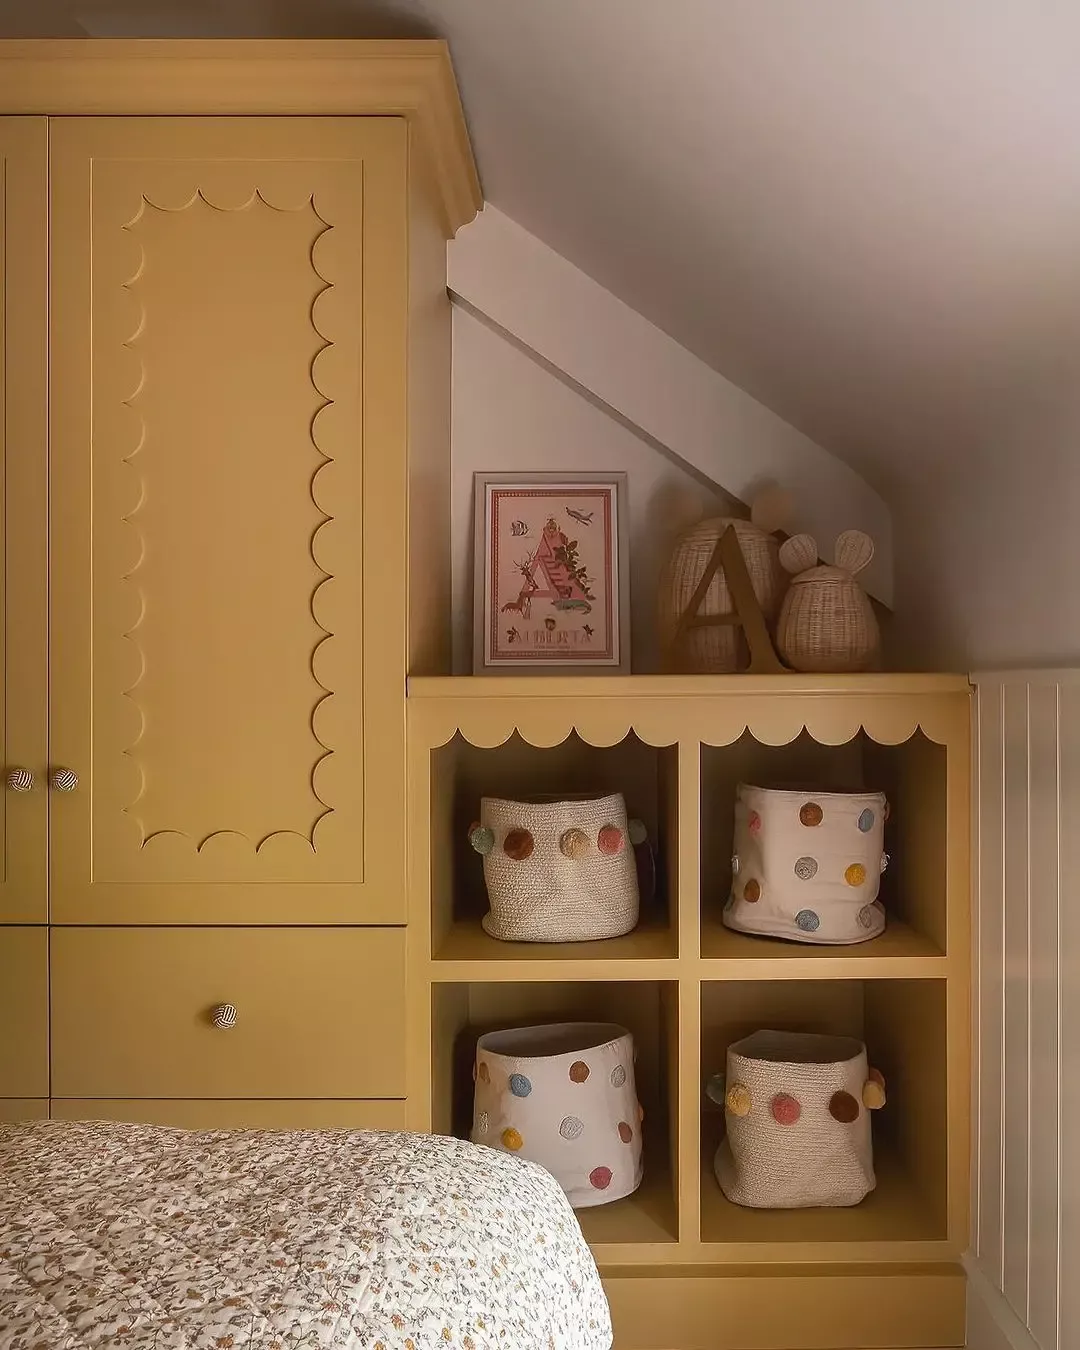 Ways To Make Kids Storage A Lot Easier
So  You Have A Clean House